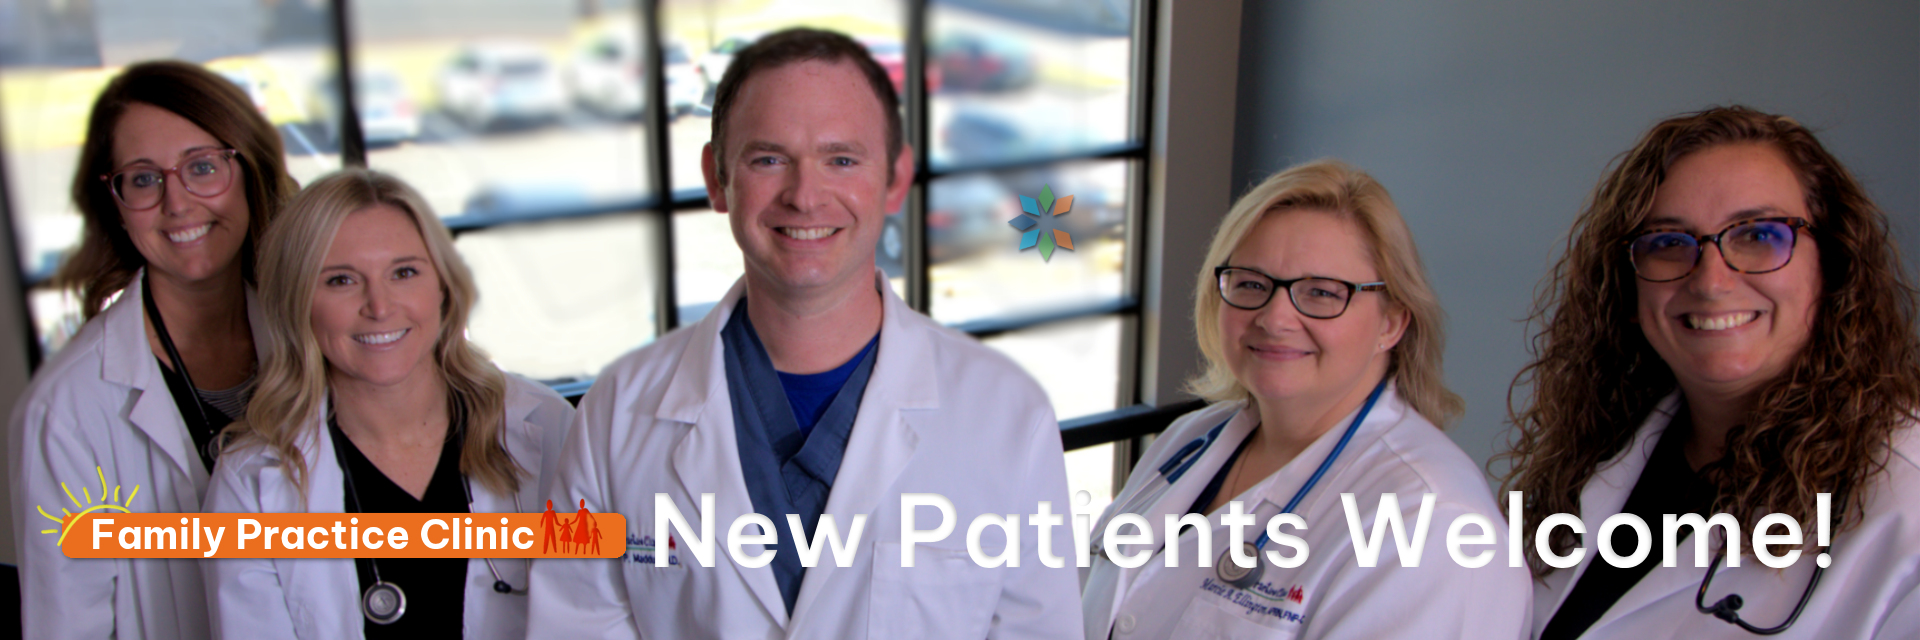 Banner picture of Physicians from Crittenden Family Practice Clinic smiling and standing next to another. There is four females and one male in the middle. Banner says:

Family Practice Clinic
New Patients Welcome!